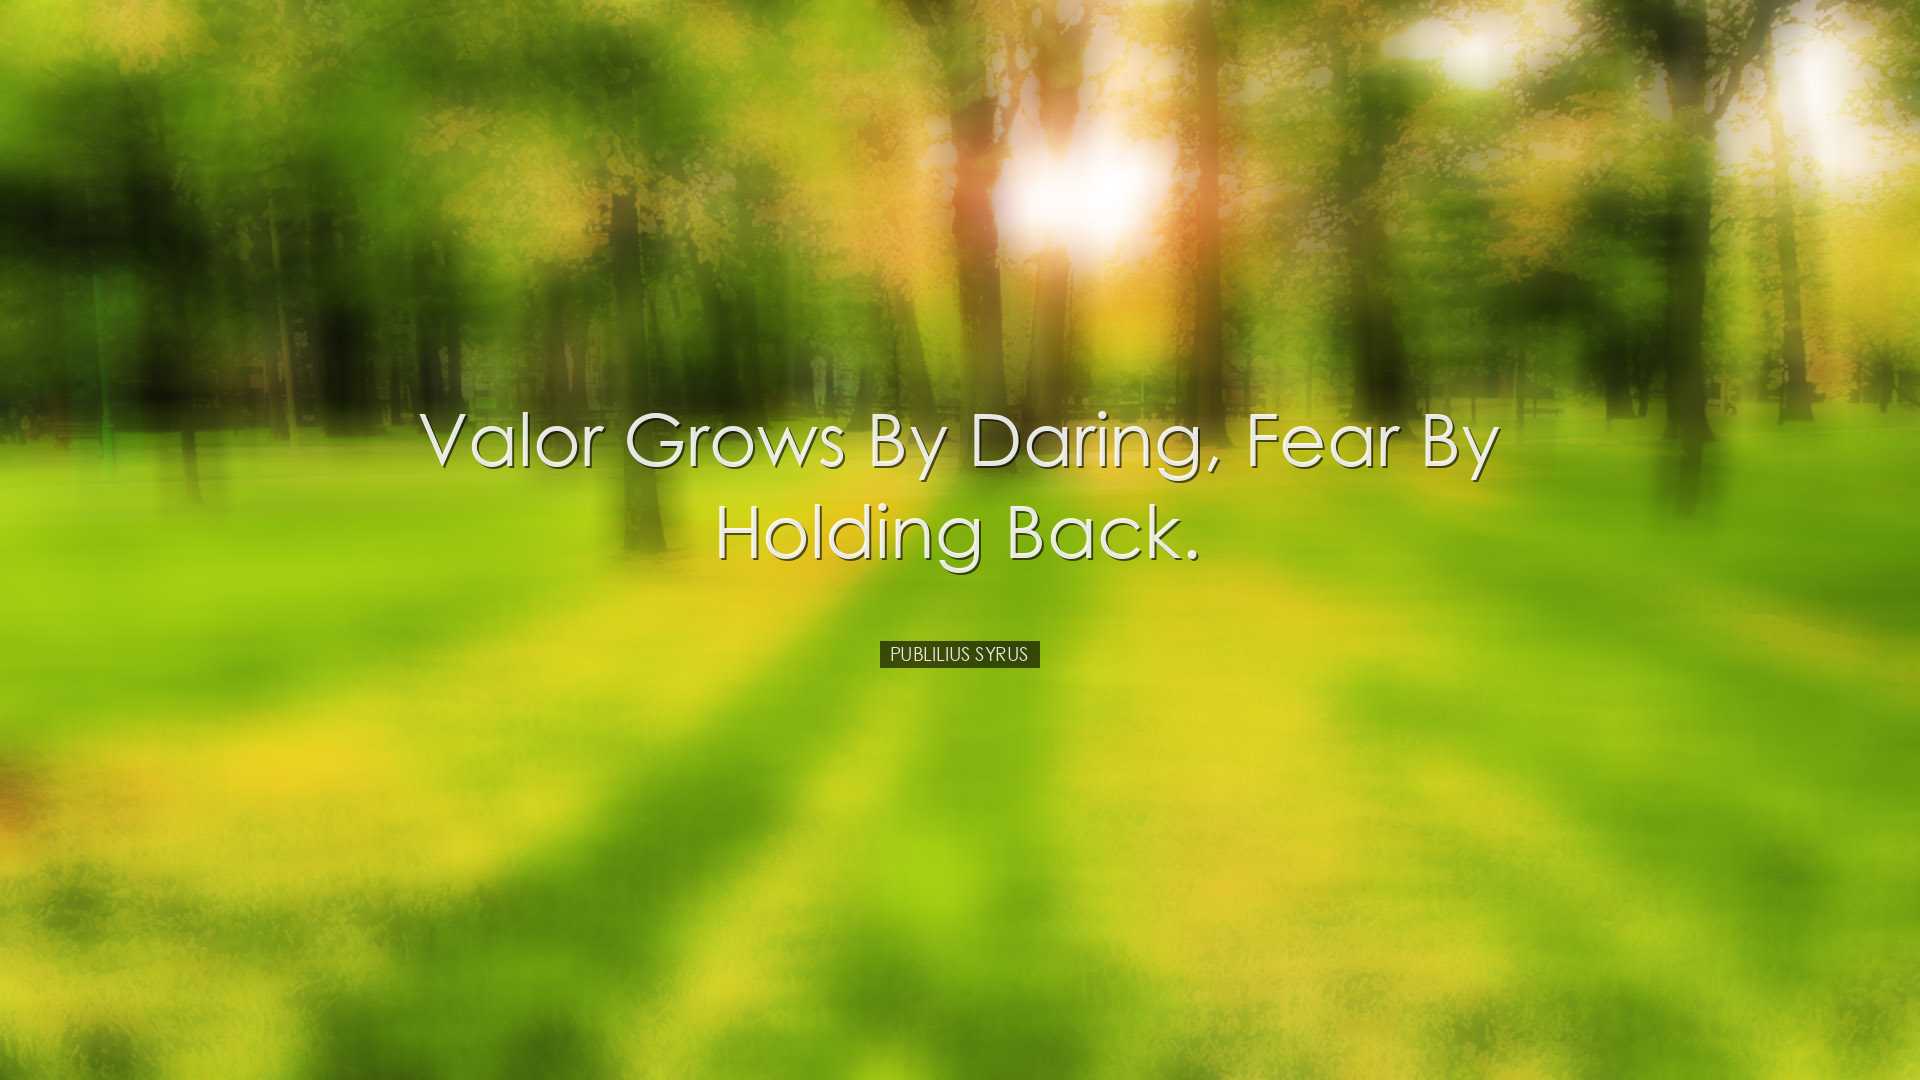 Valor grows by daring, fear by holding back. - Publilius Syrus